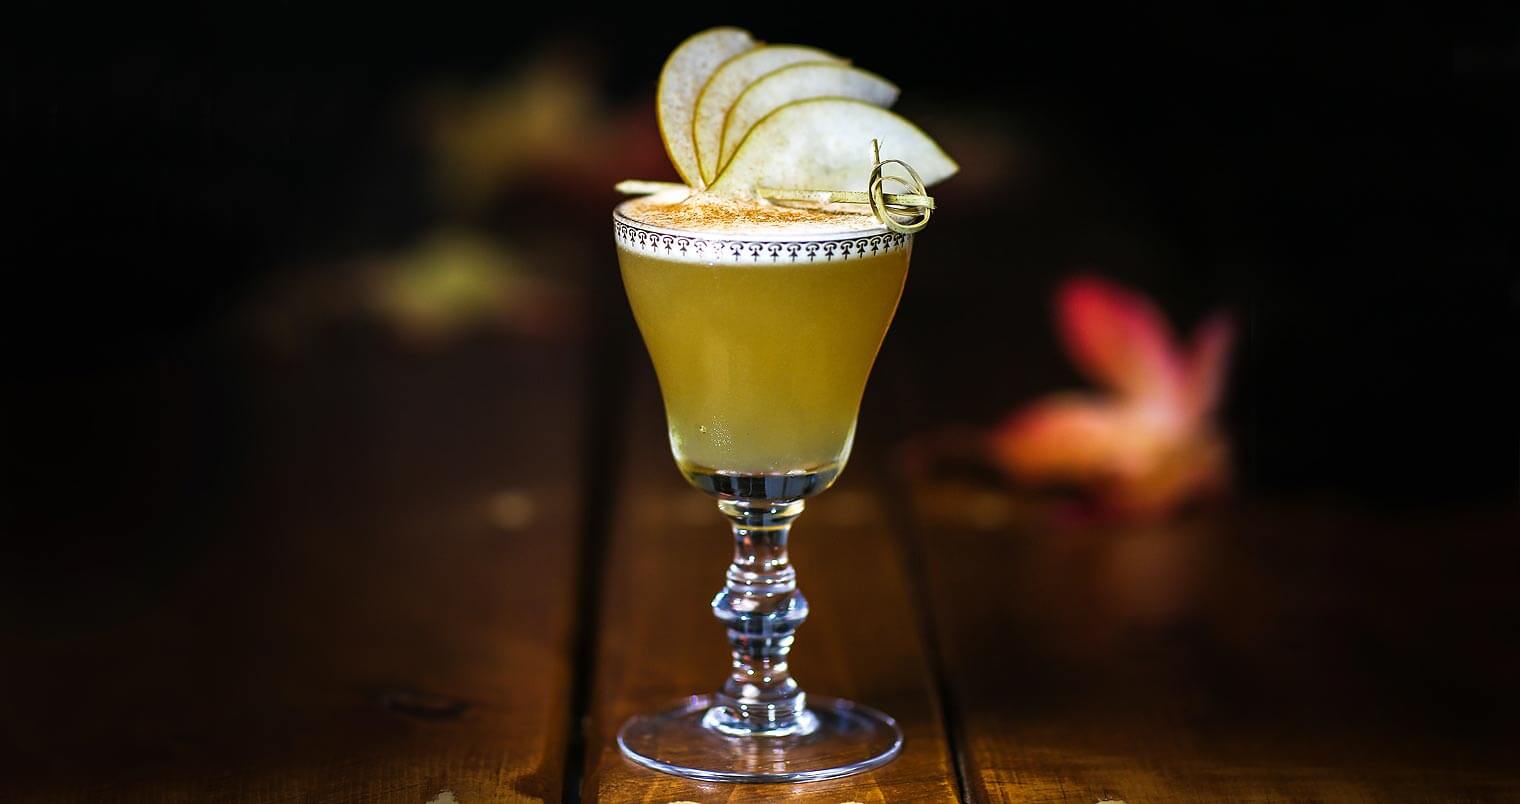 Harvest Moon cocktail, with garnish, featured image